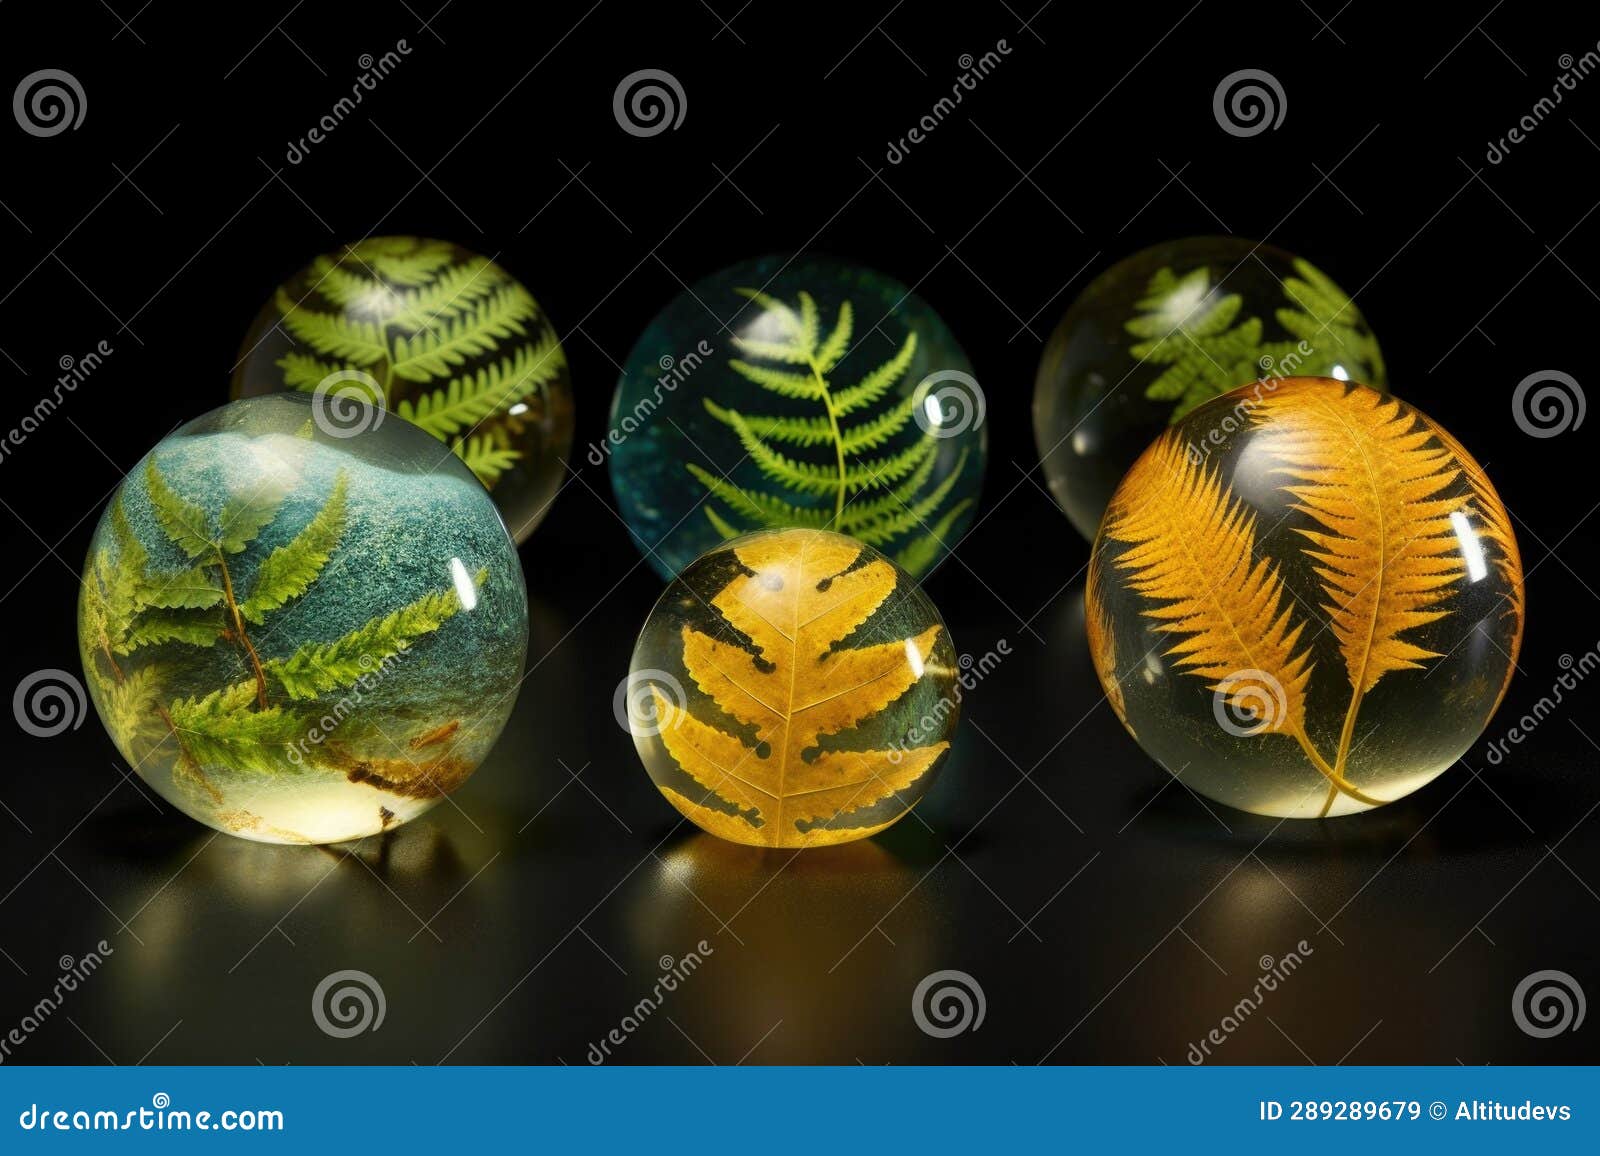 resin paperweights with a variety of preserved leaves